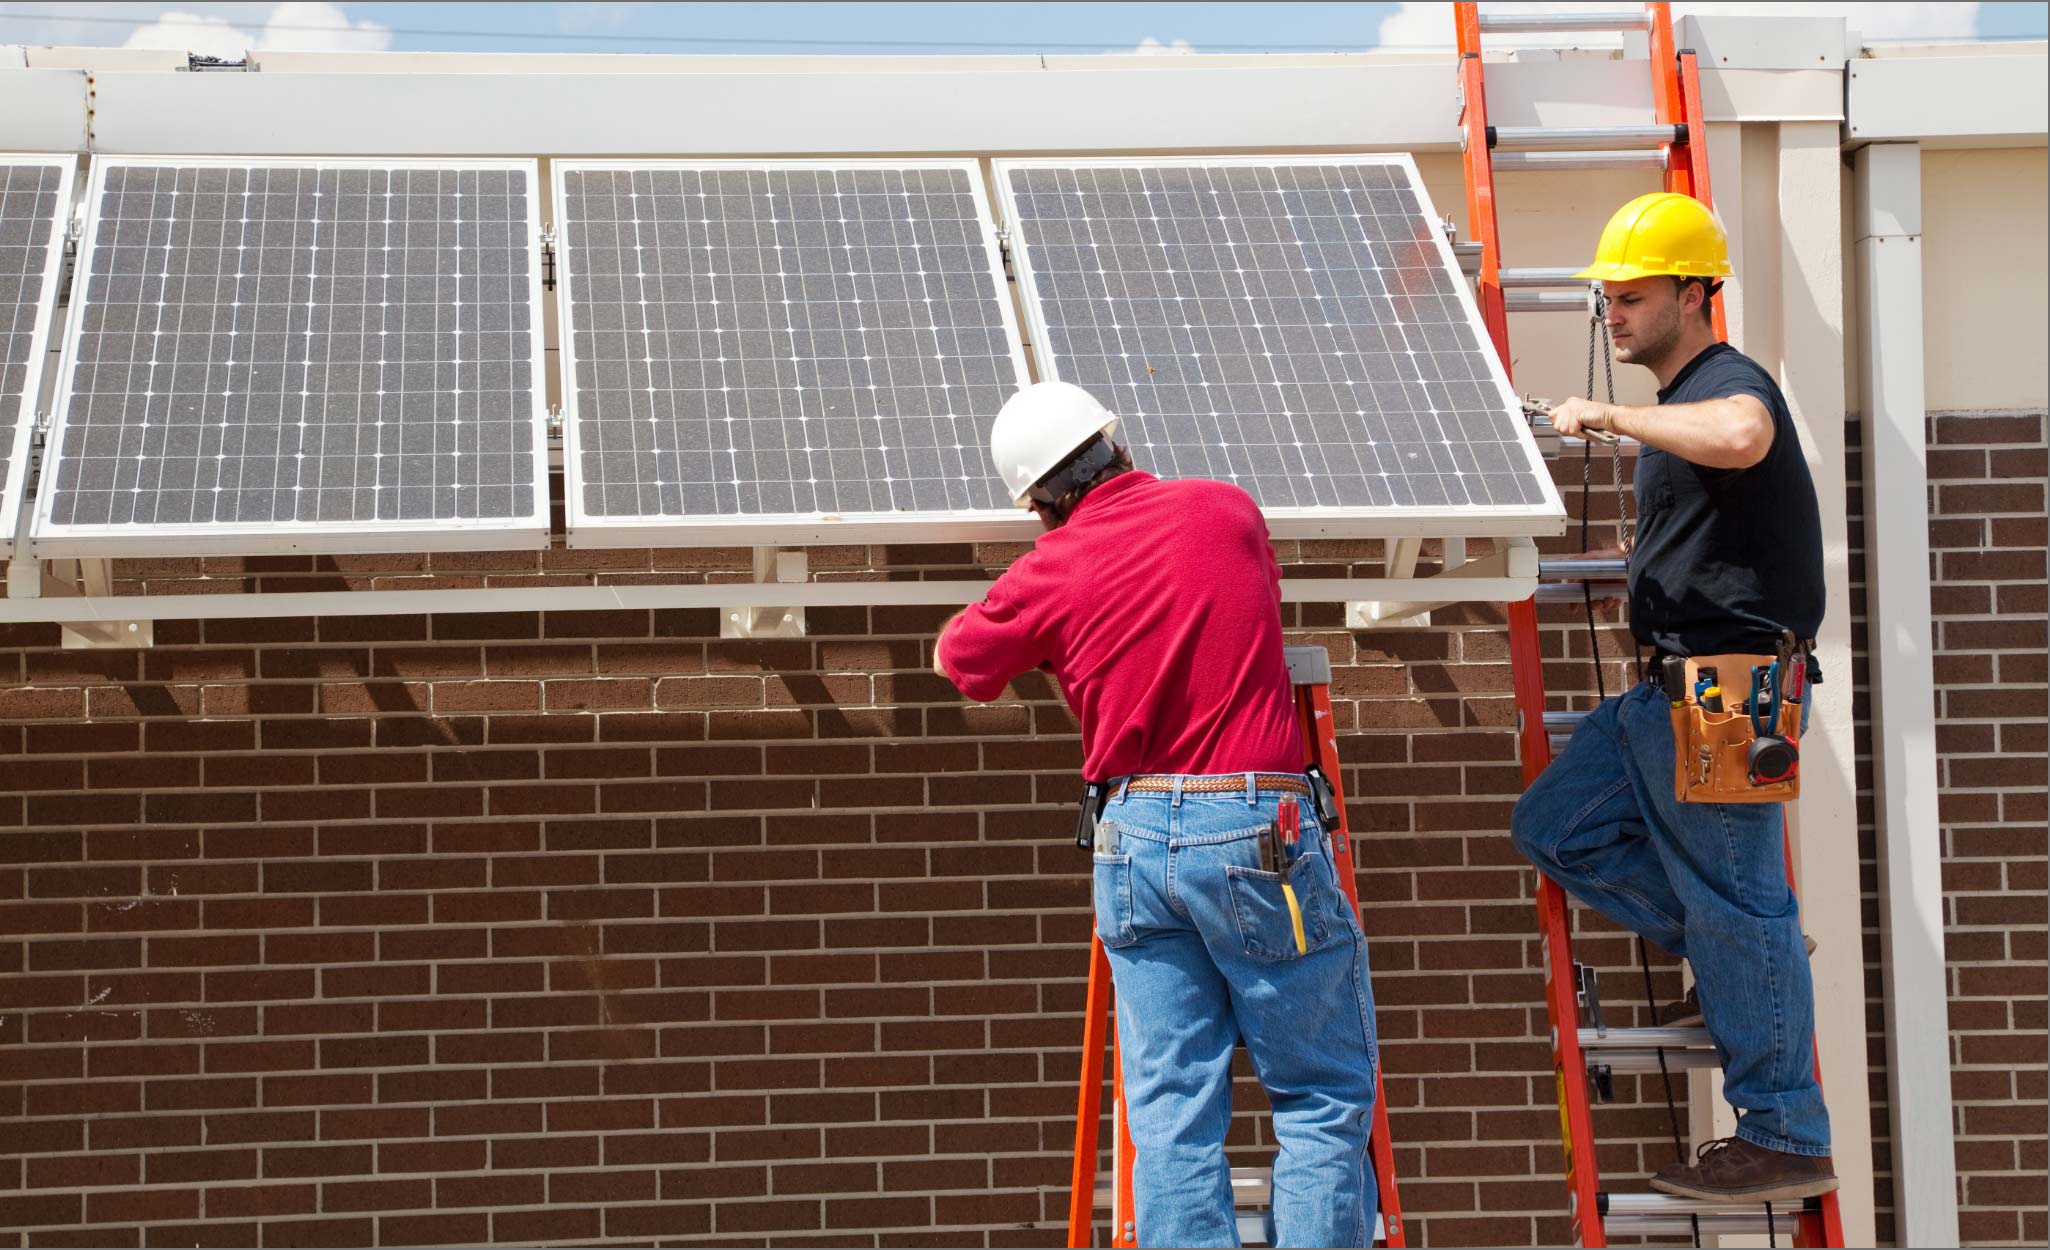 Workers install solar panels on a roof.